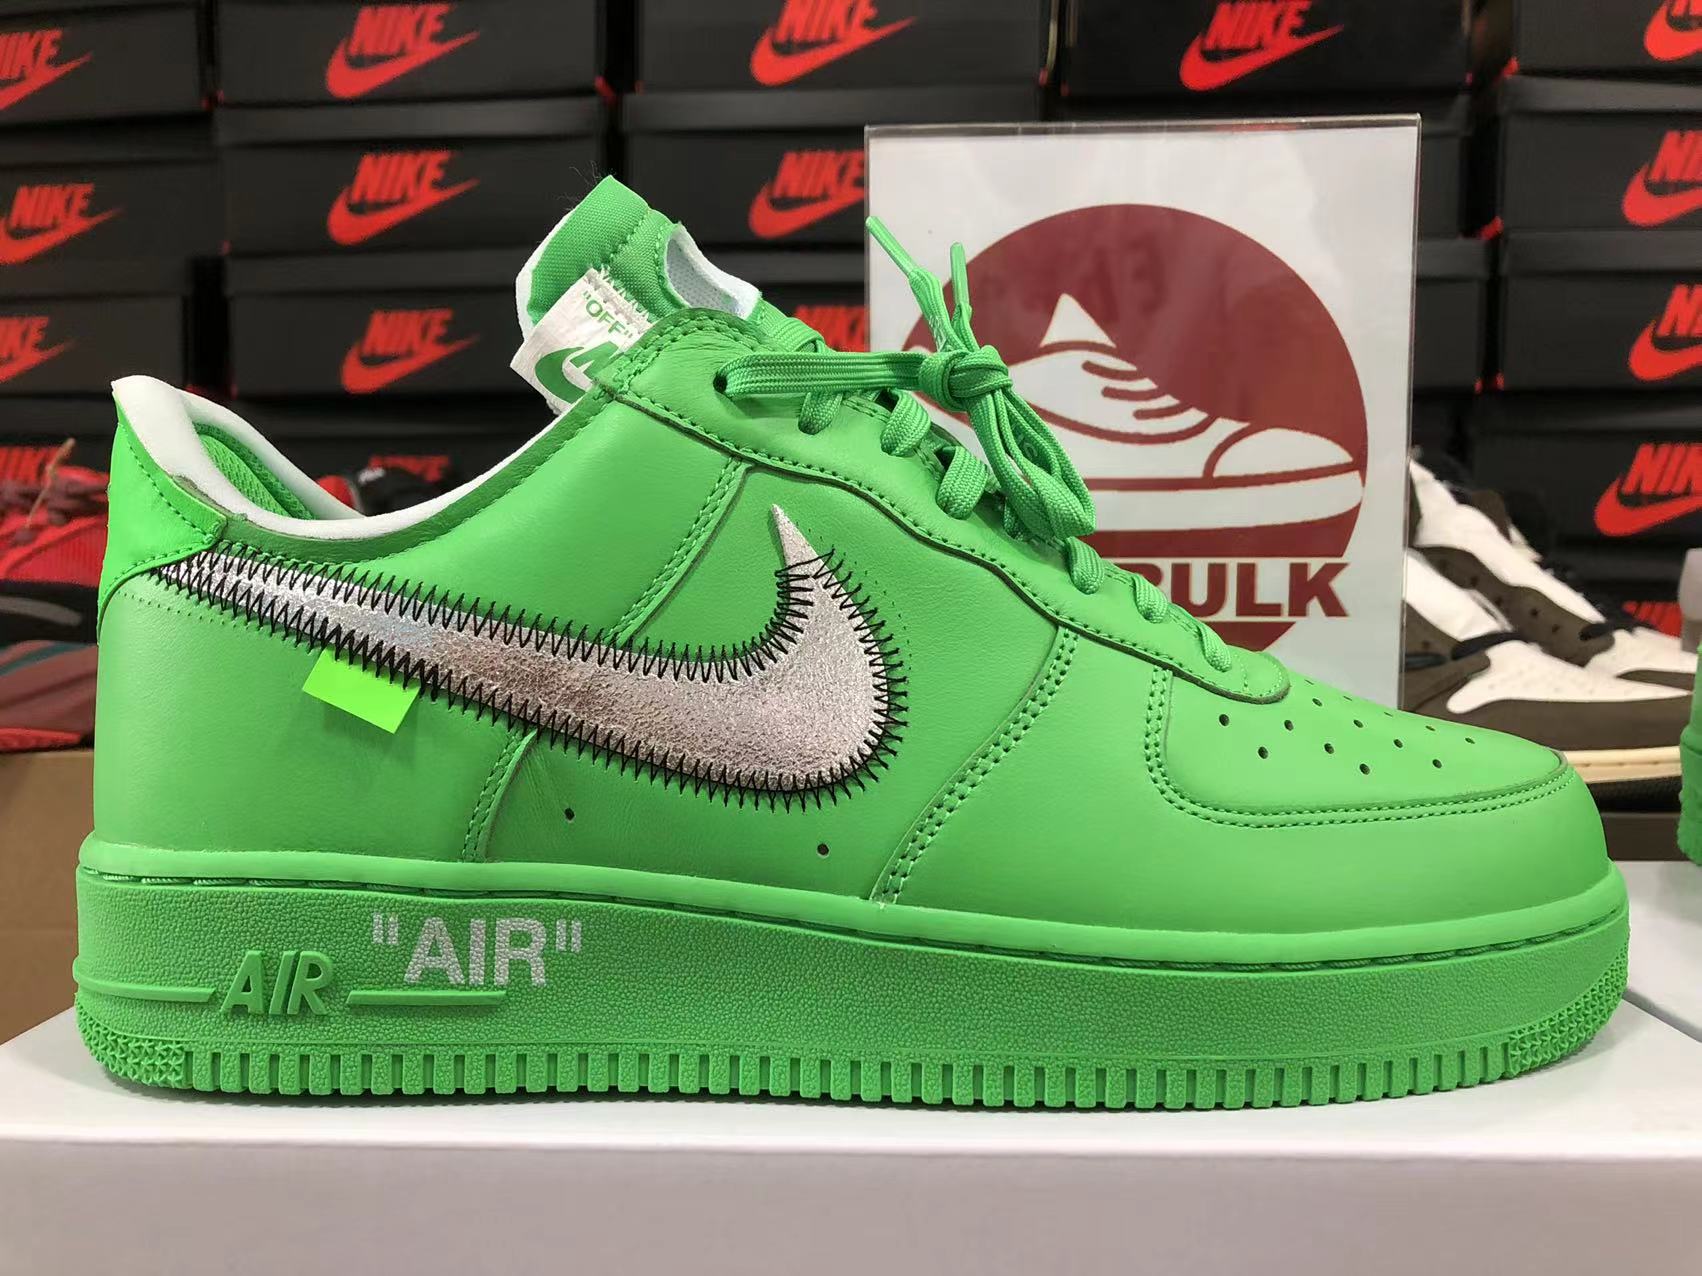 Nike x Off-White Air Force 1 Low Green Spark "Brooklyn"  (DX1419-300) - Size 5M